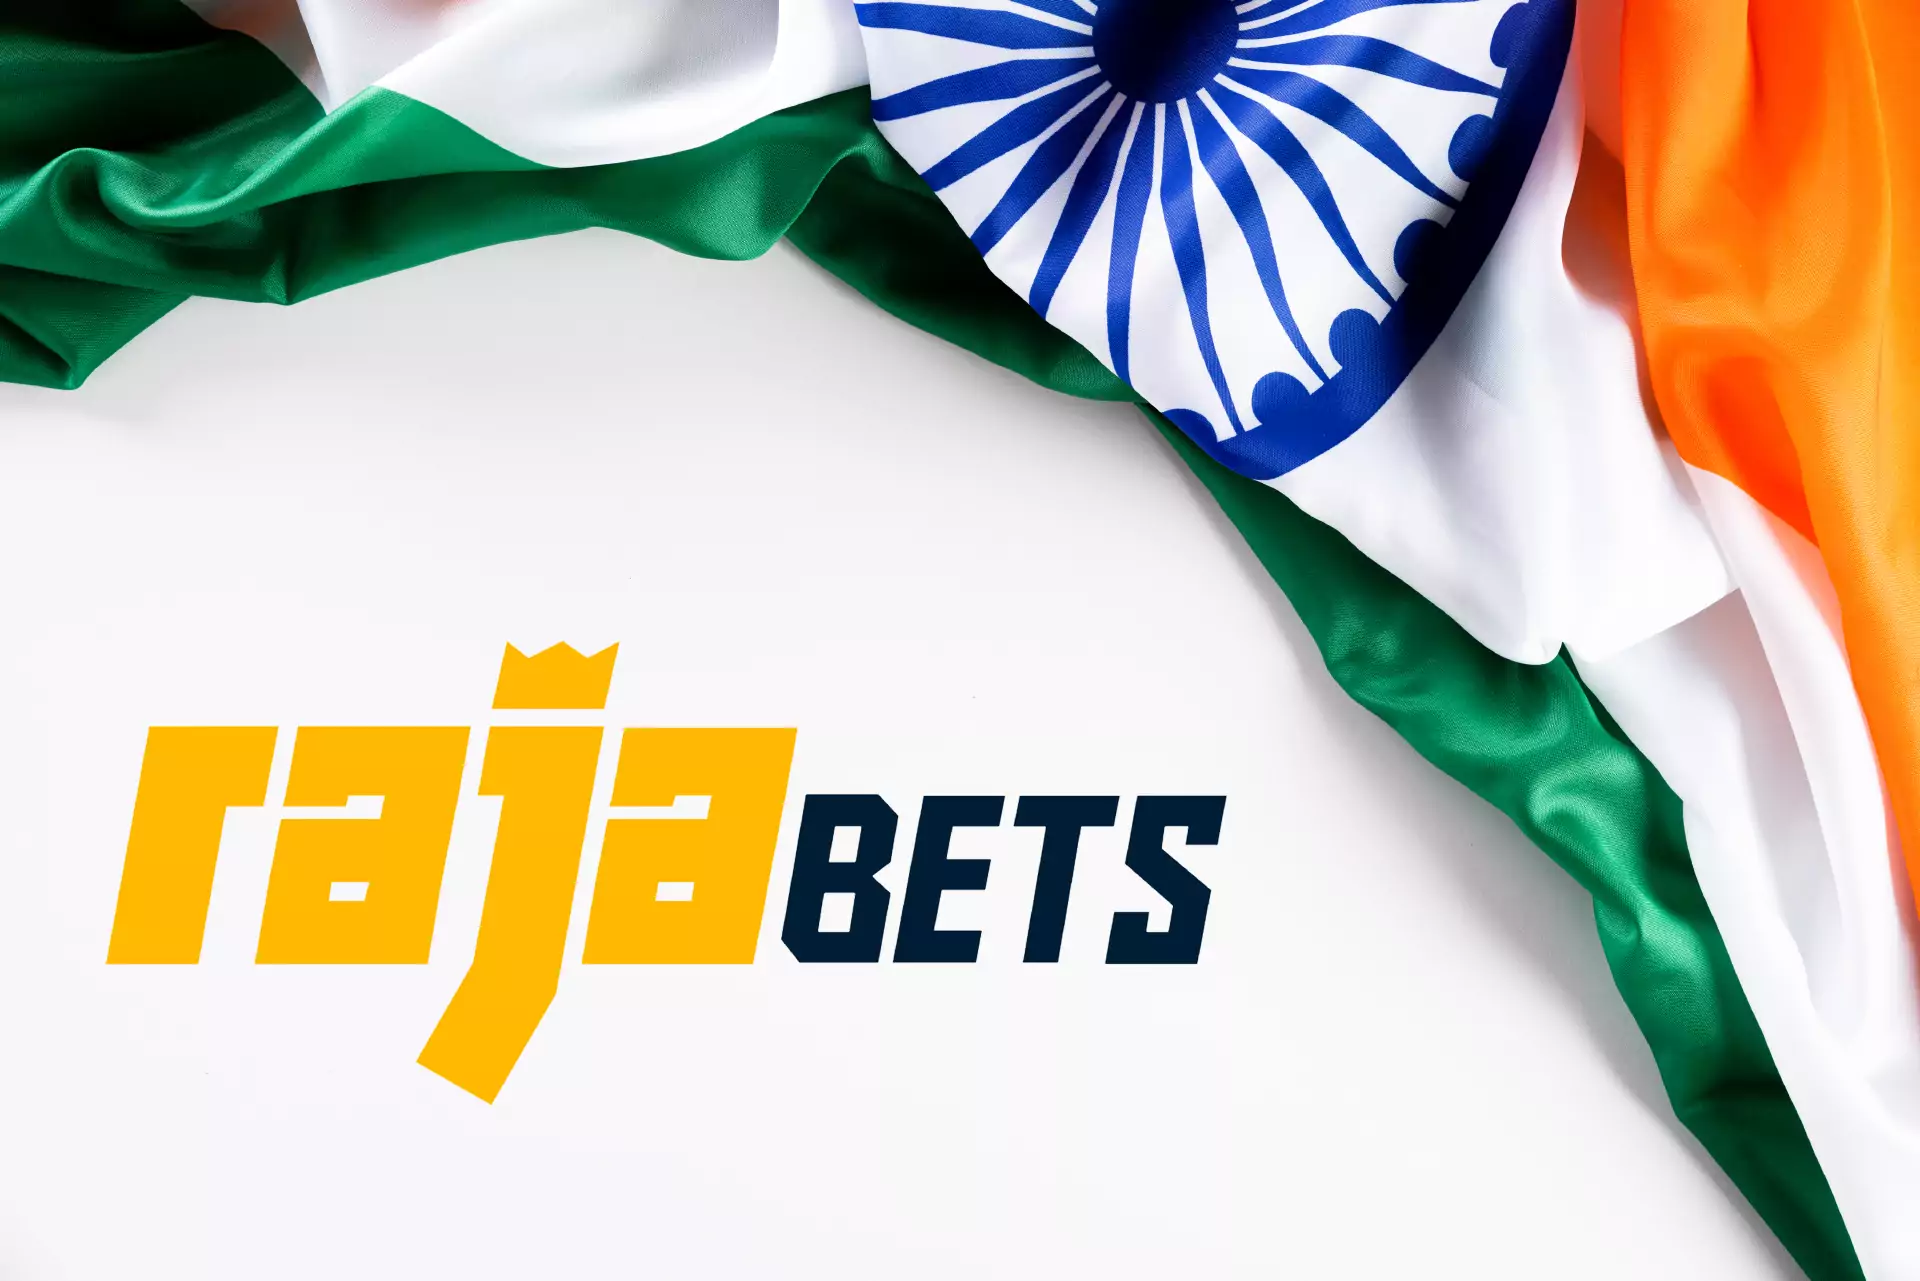 Rajabets is a legal and safe bookmaker working in India.